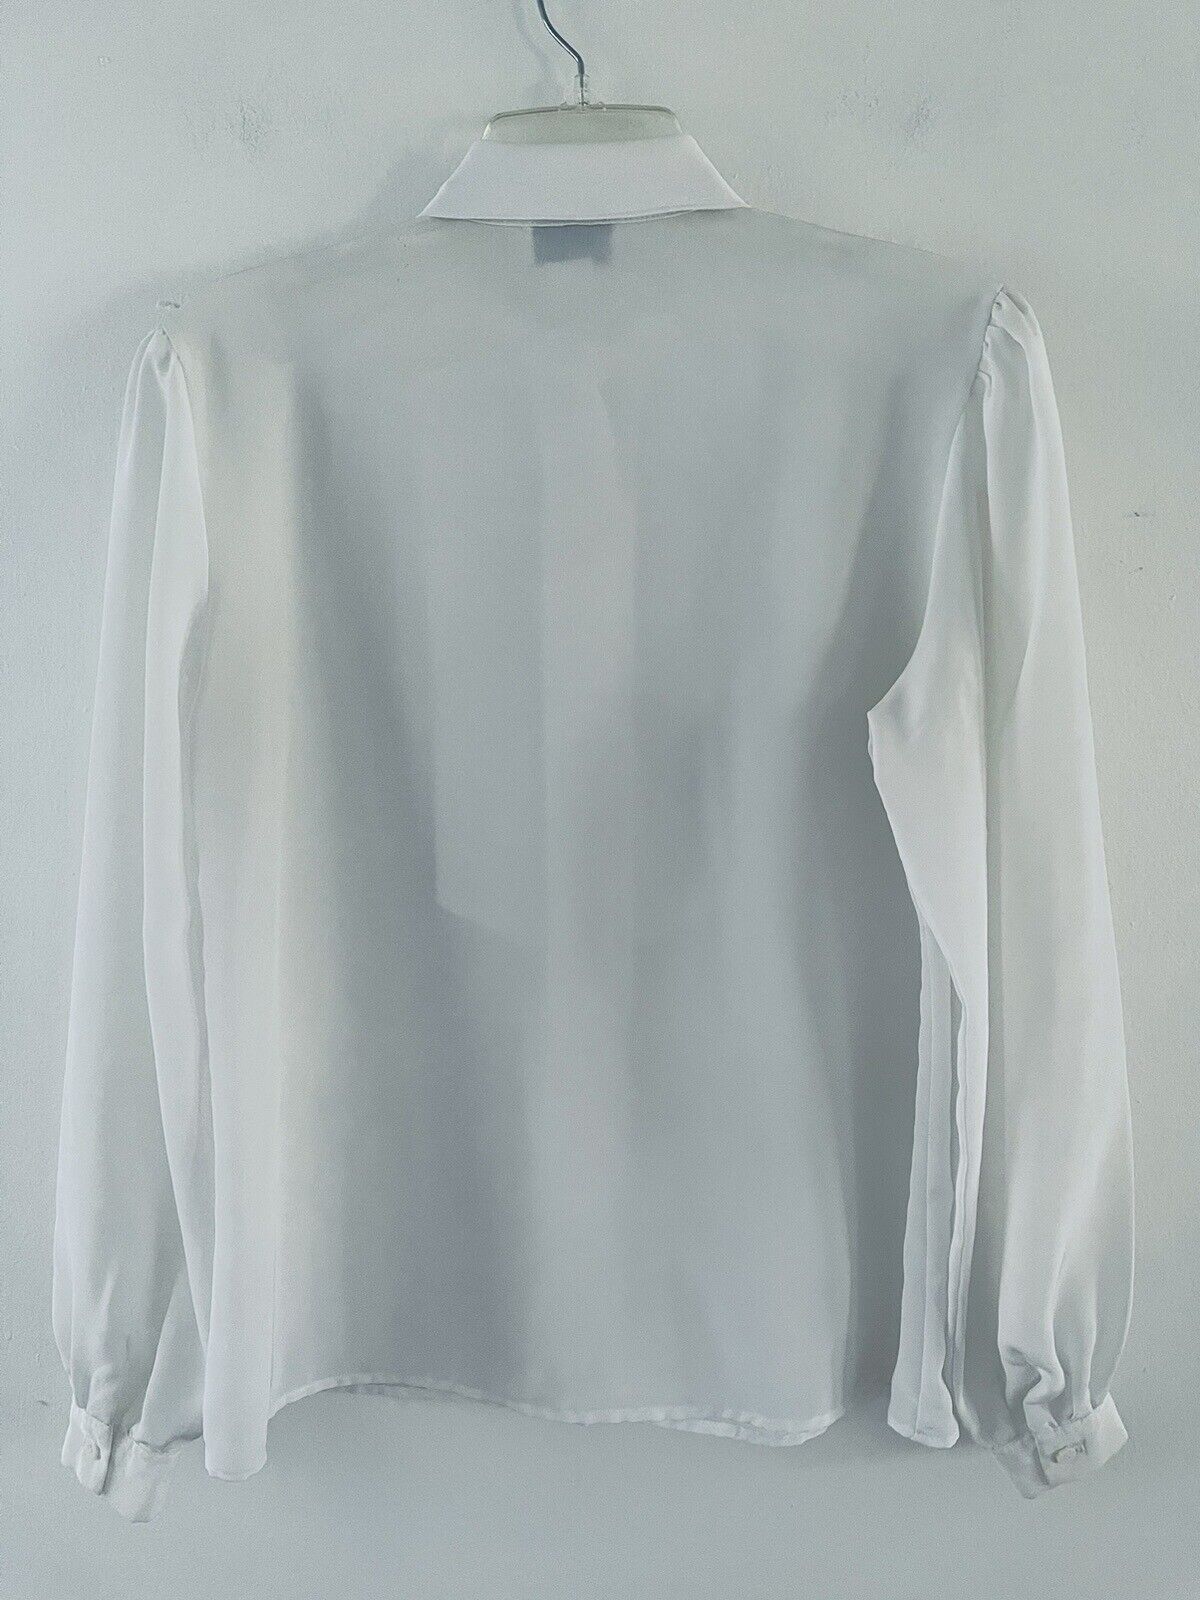 Vintage Gailord Women’s White Long Sleeves Top Bl… - image 5